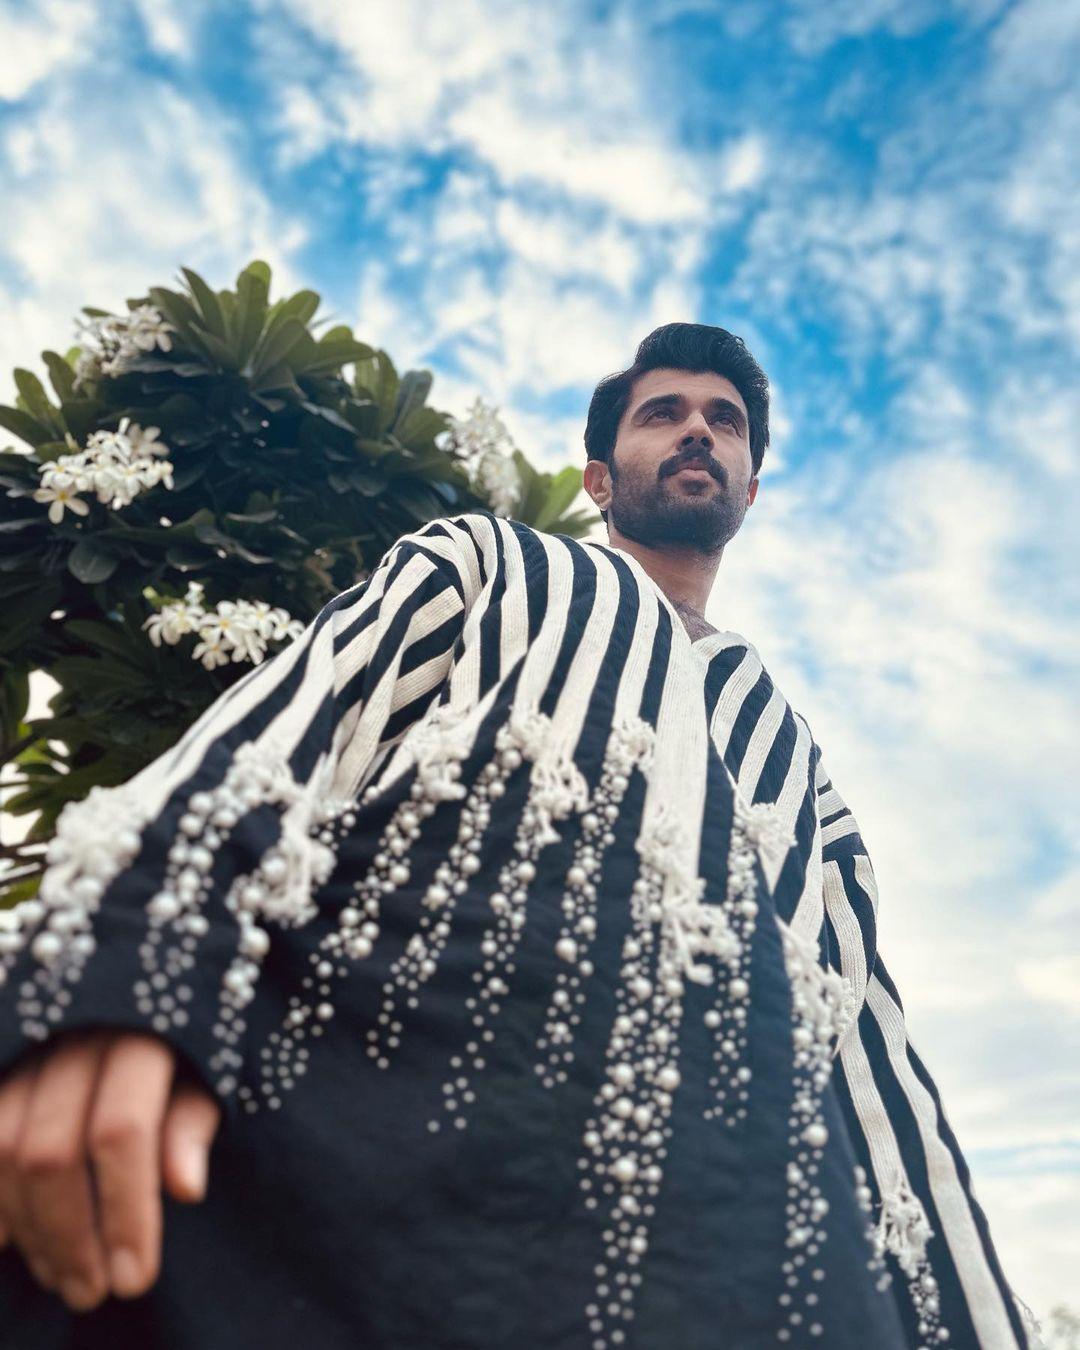 Vijay Deverakonda's picture from his Kushi promotional diaries made our eyes glued to him